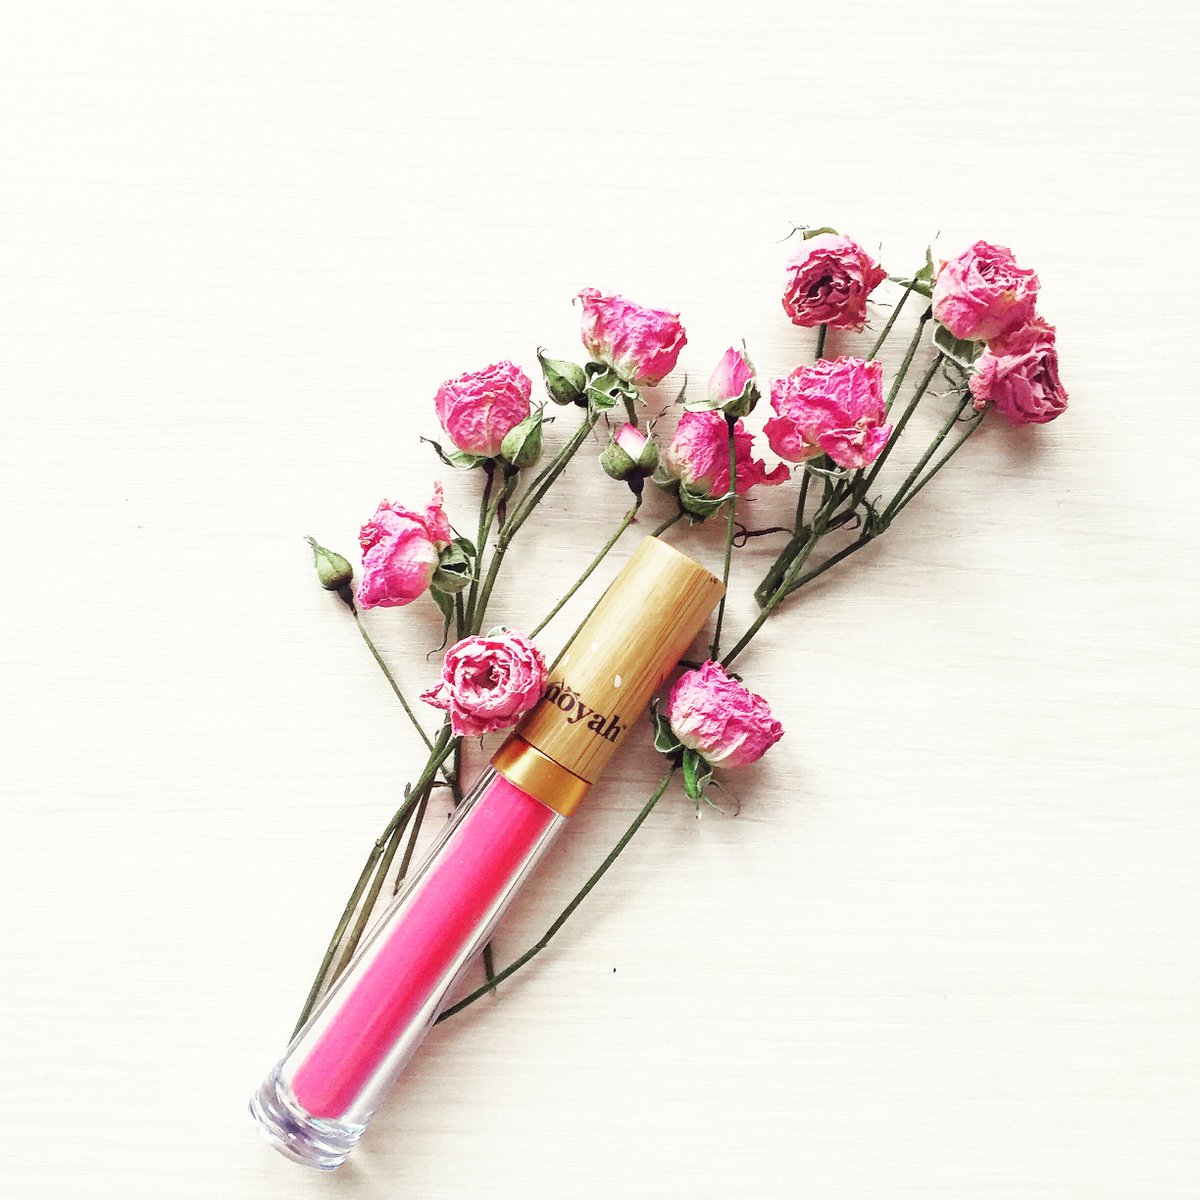 This all natural lip gloss is much healthier than its name suggests, so brighten up with Pink Frosting! #naturallip #prettyinpink